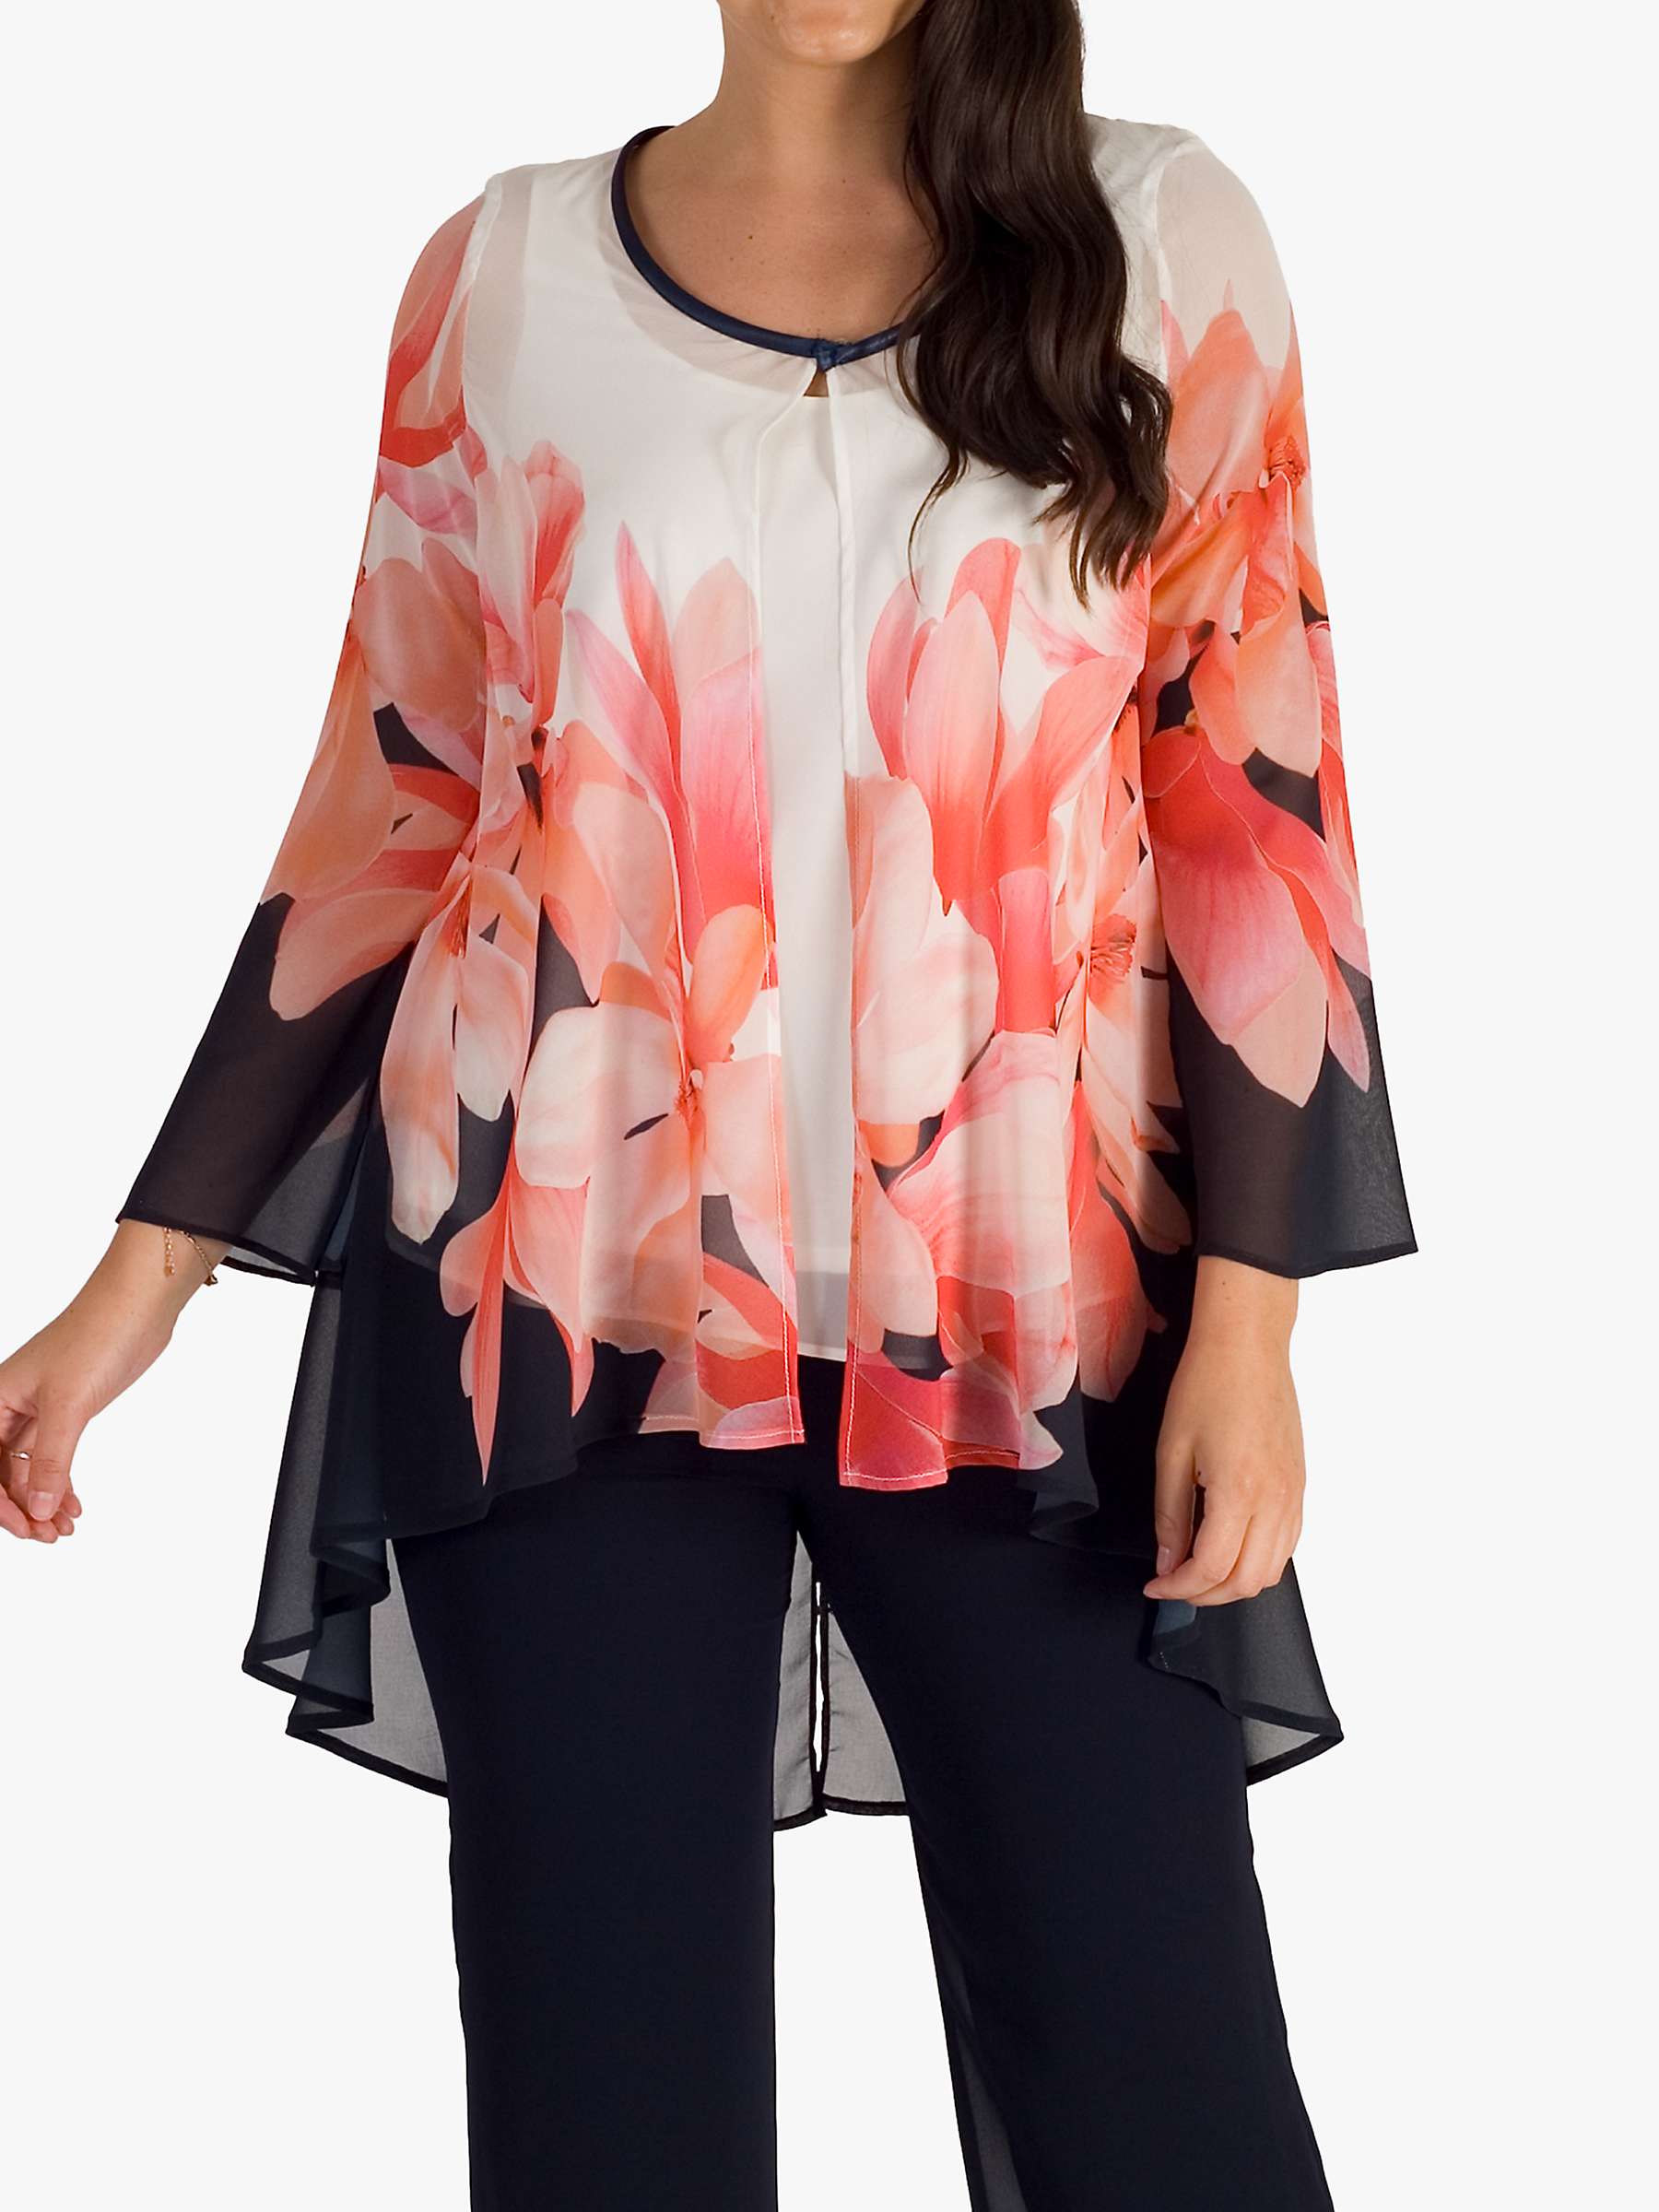 Buy Chesca High Low Chiffon Floral Coat, Navy/Coral/Ivory Online at johnlewis.com